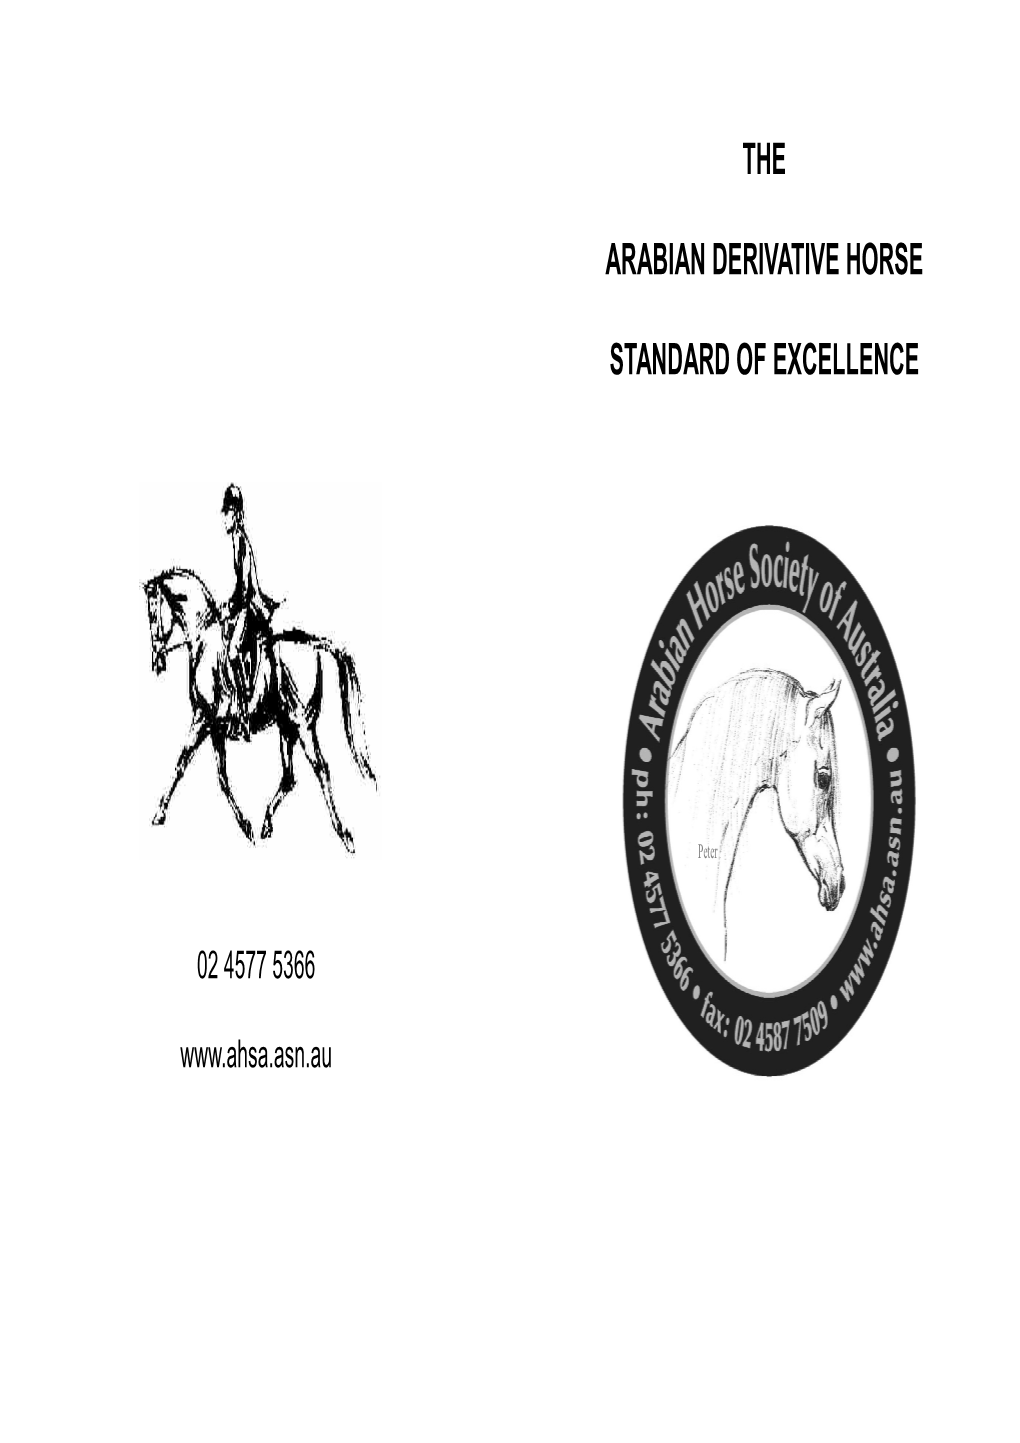 The Arabian Derivative Horse Standard of Excellence